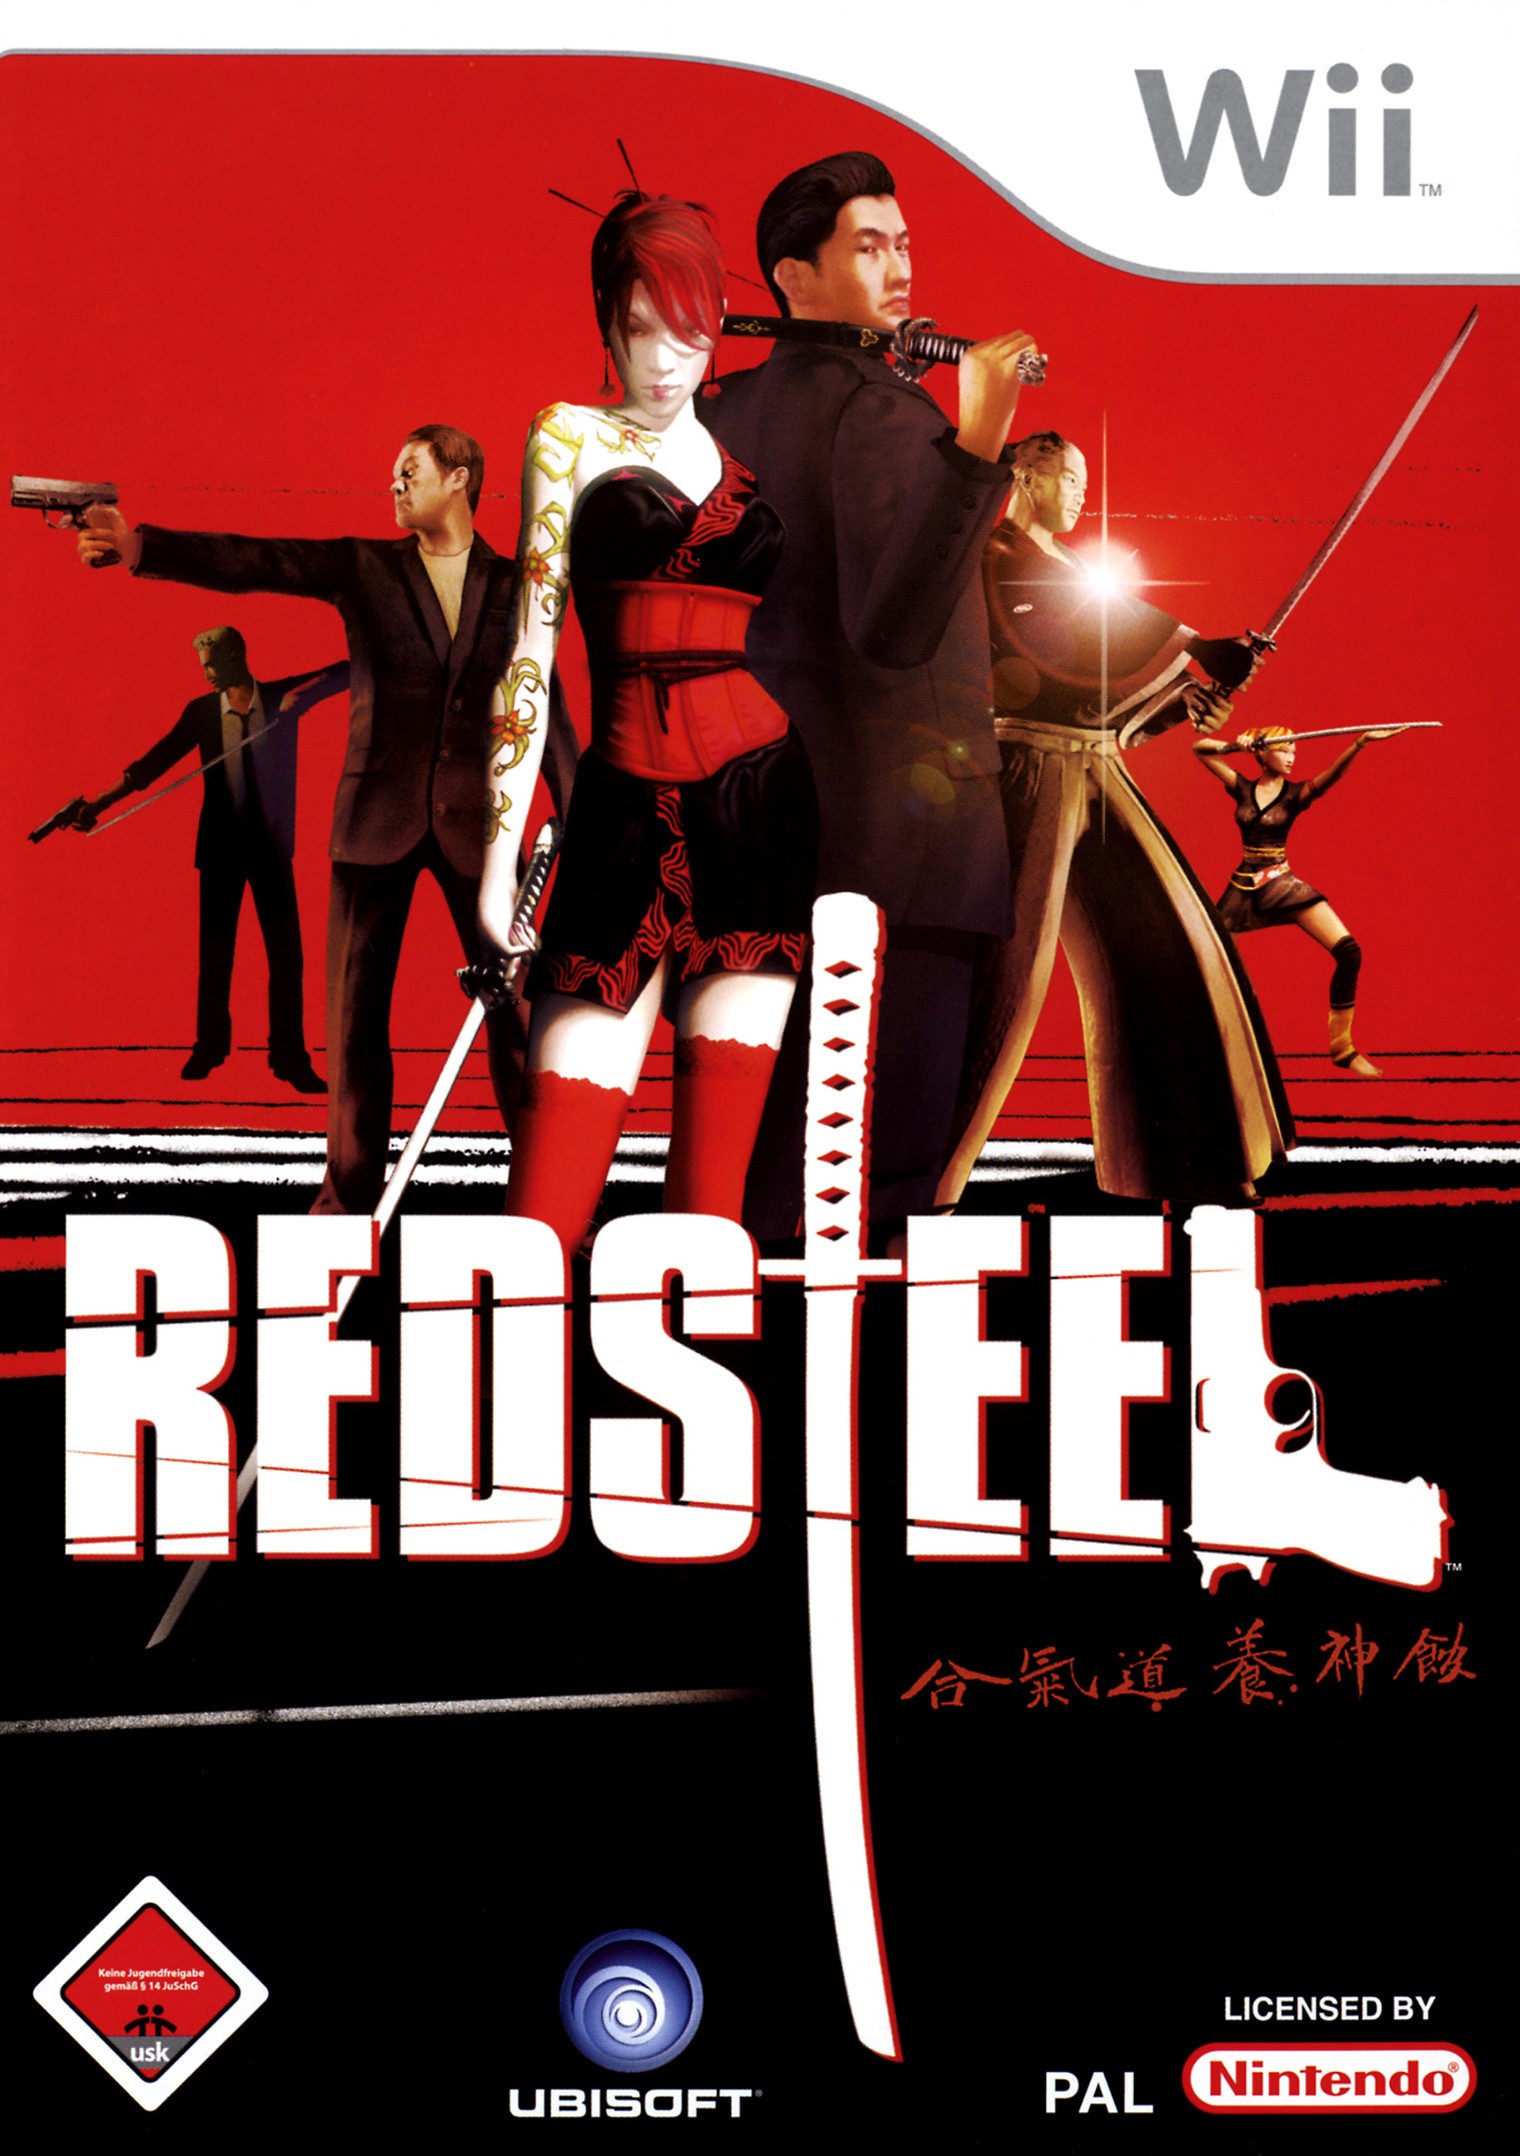 'Red Steel'